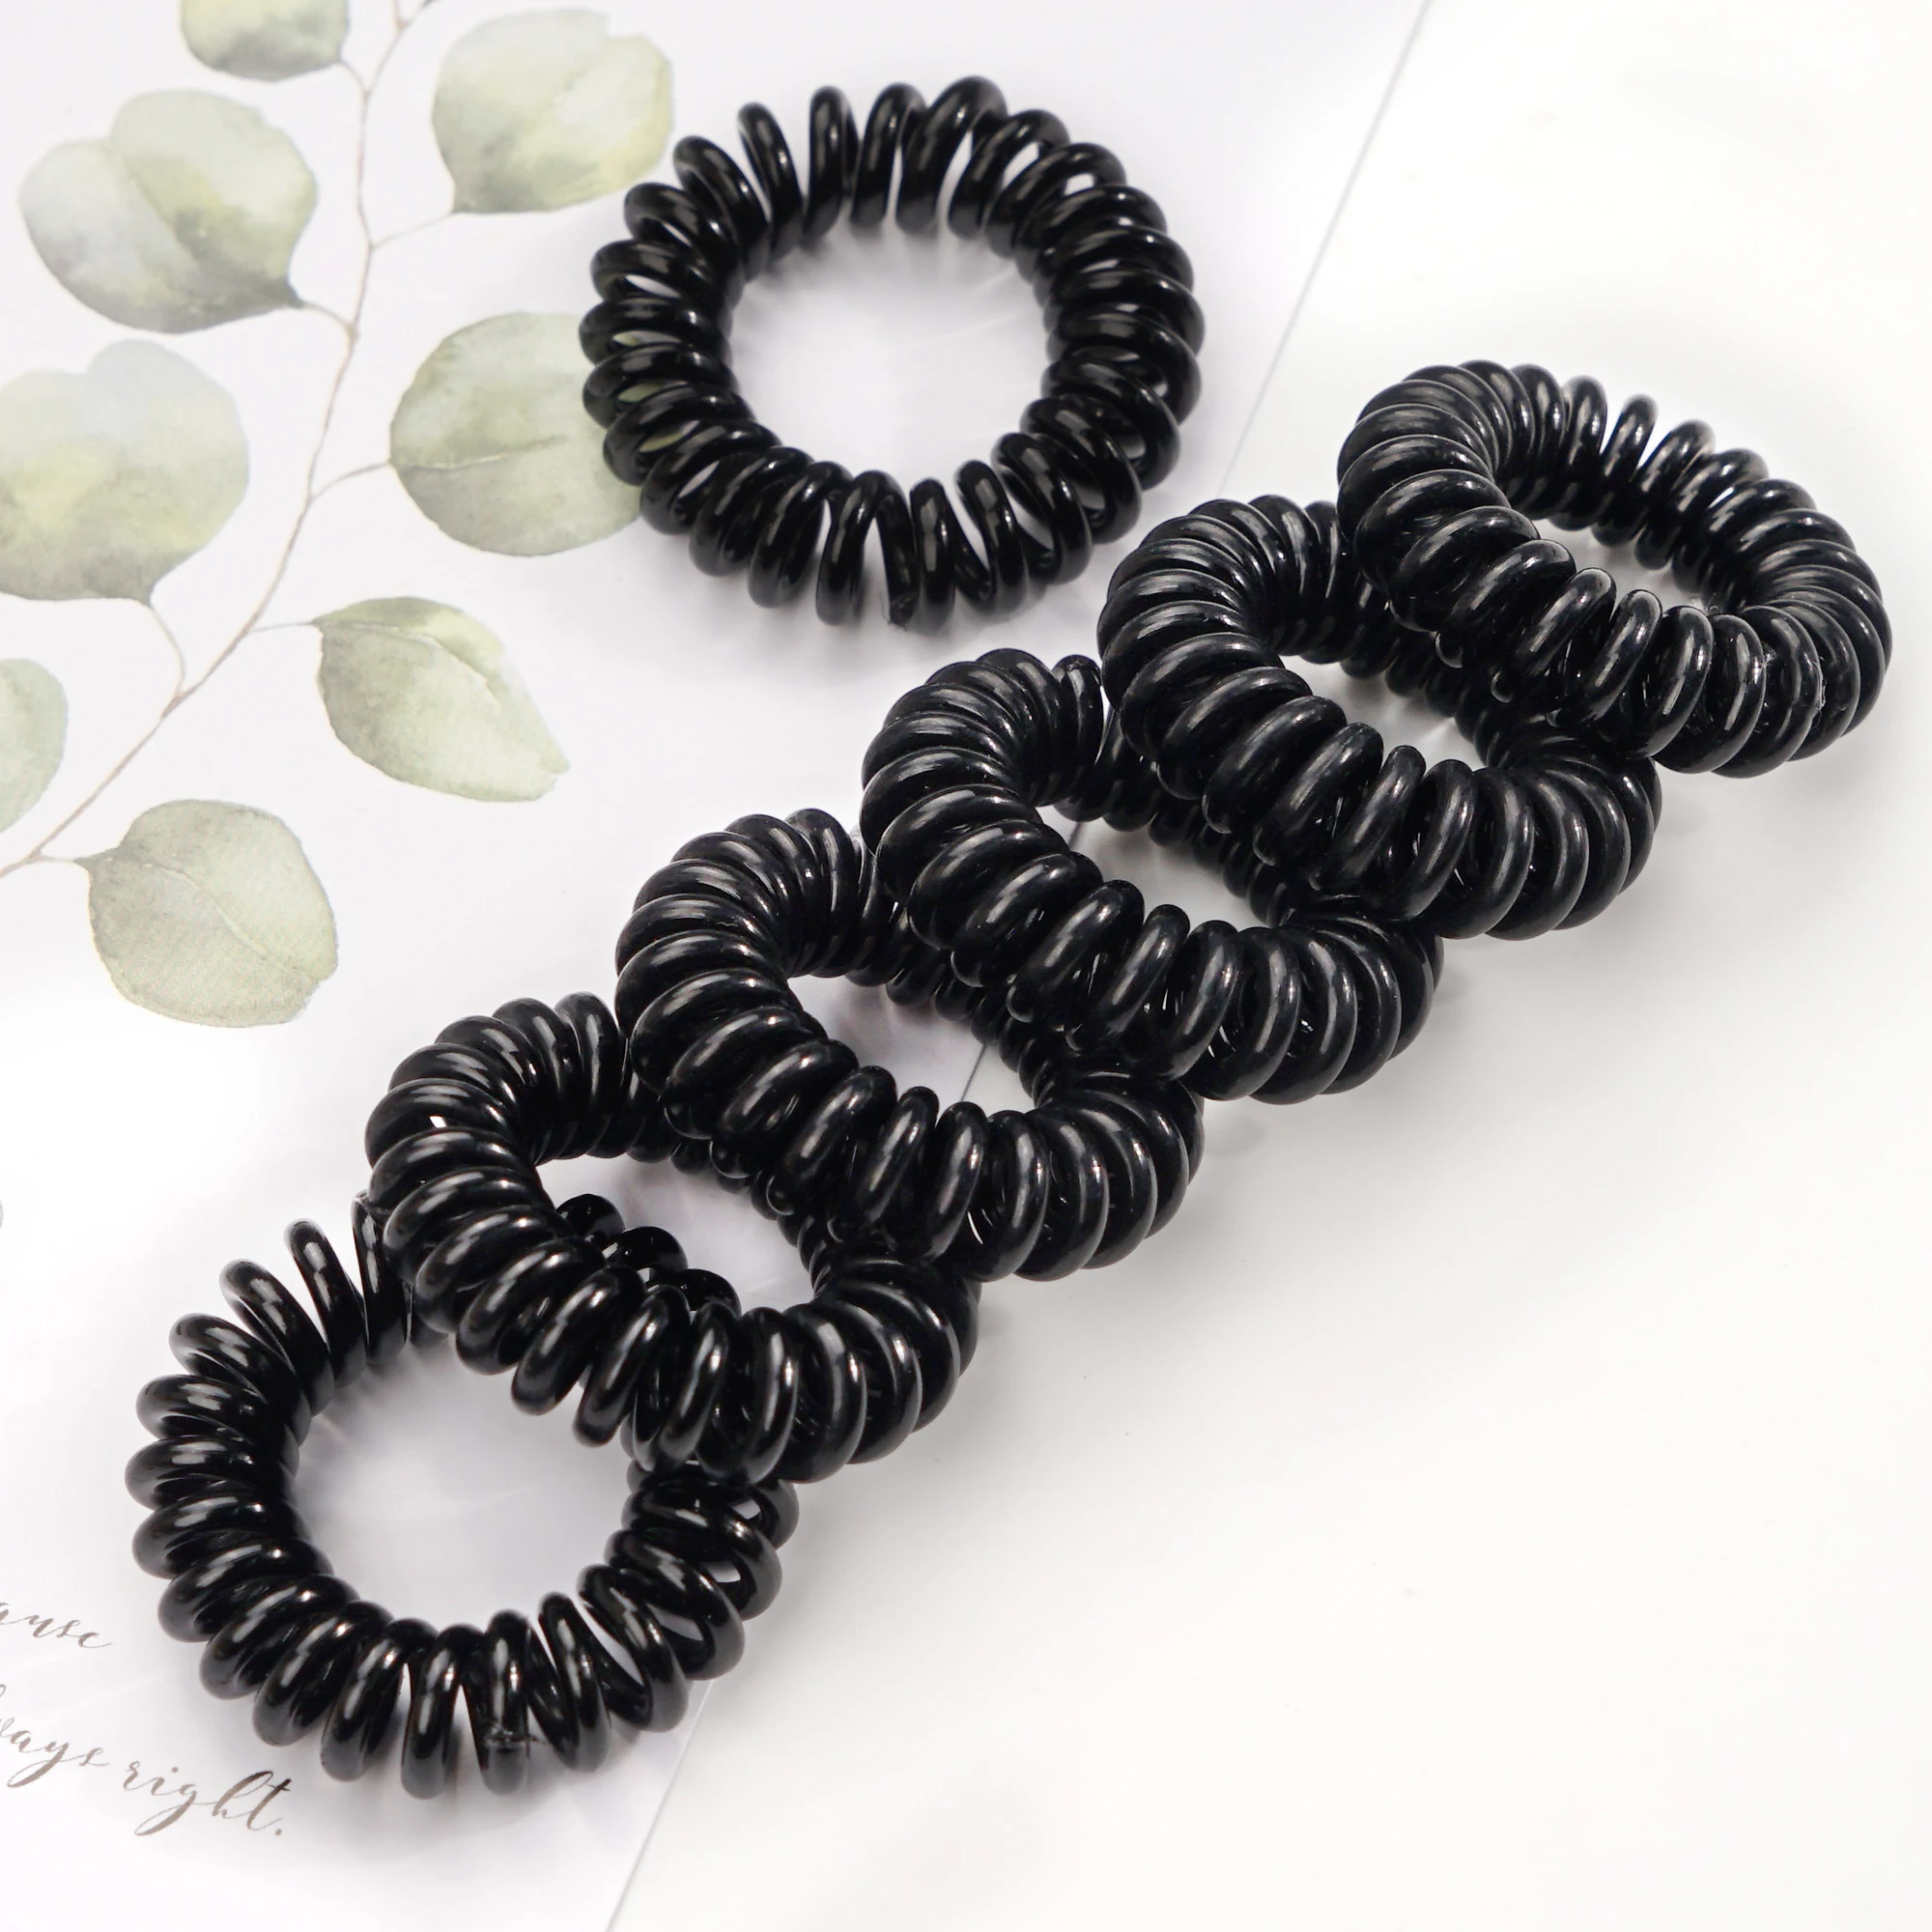 20pcs 3.5cm Small Telephone Line Hair Ropes Girls Elastic Hair Bands Kid Ponytail Holder Tie Gum Hair Accessori gifts images - 6